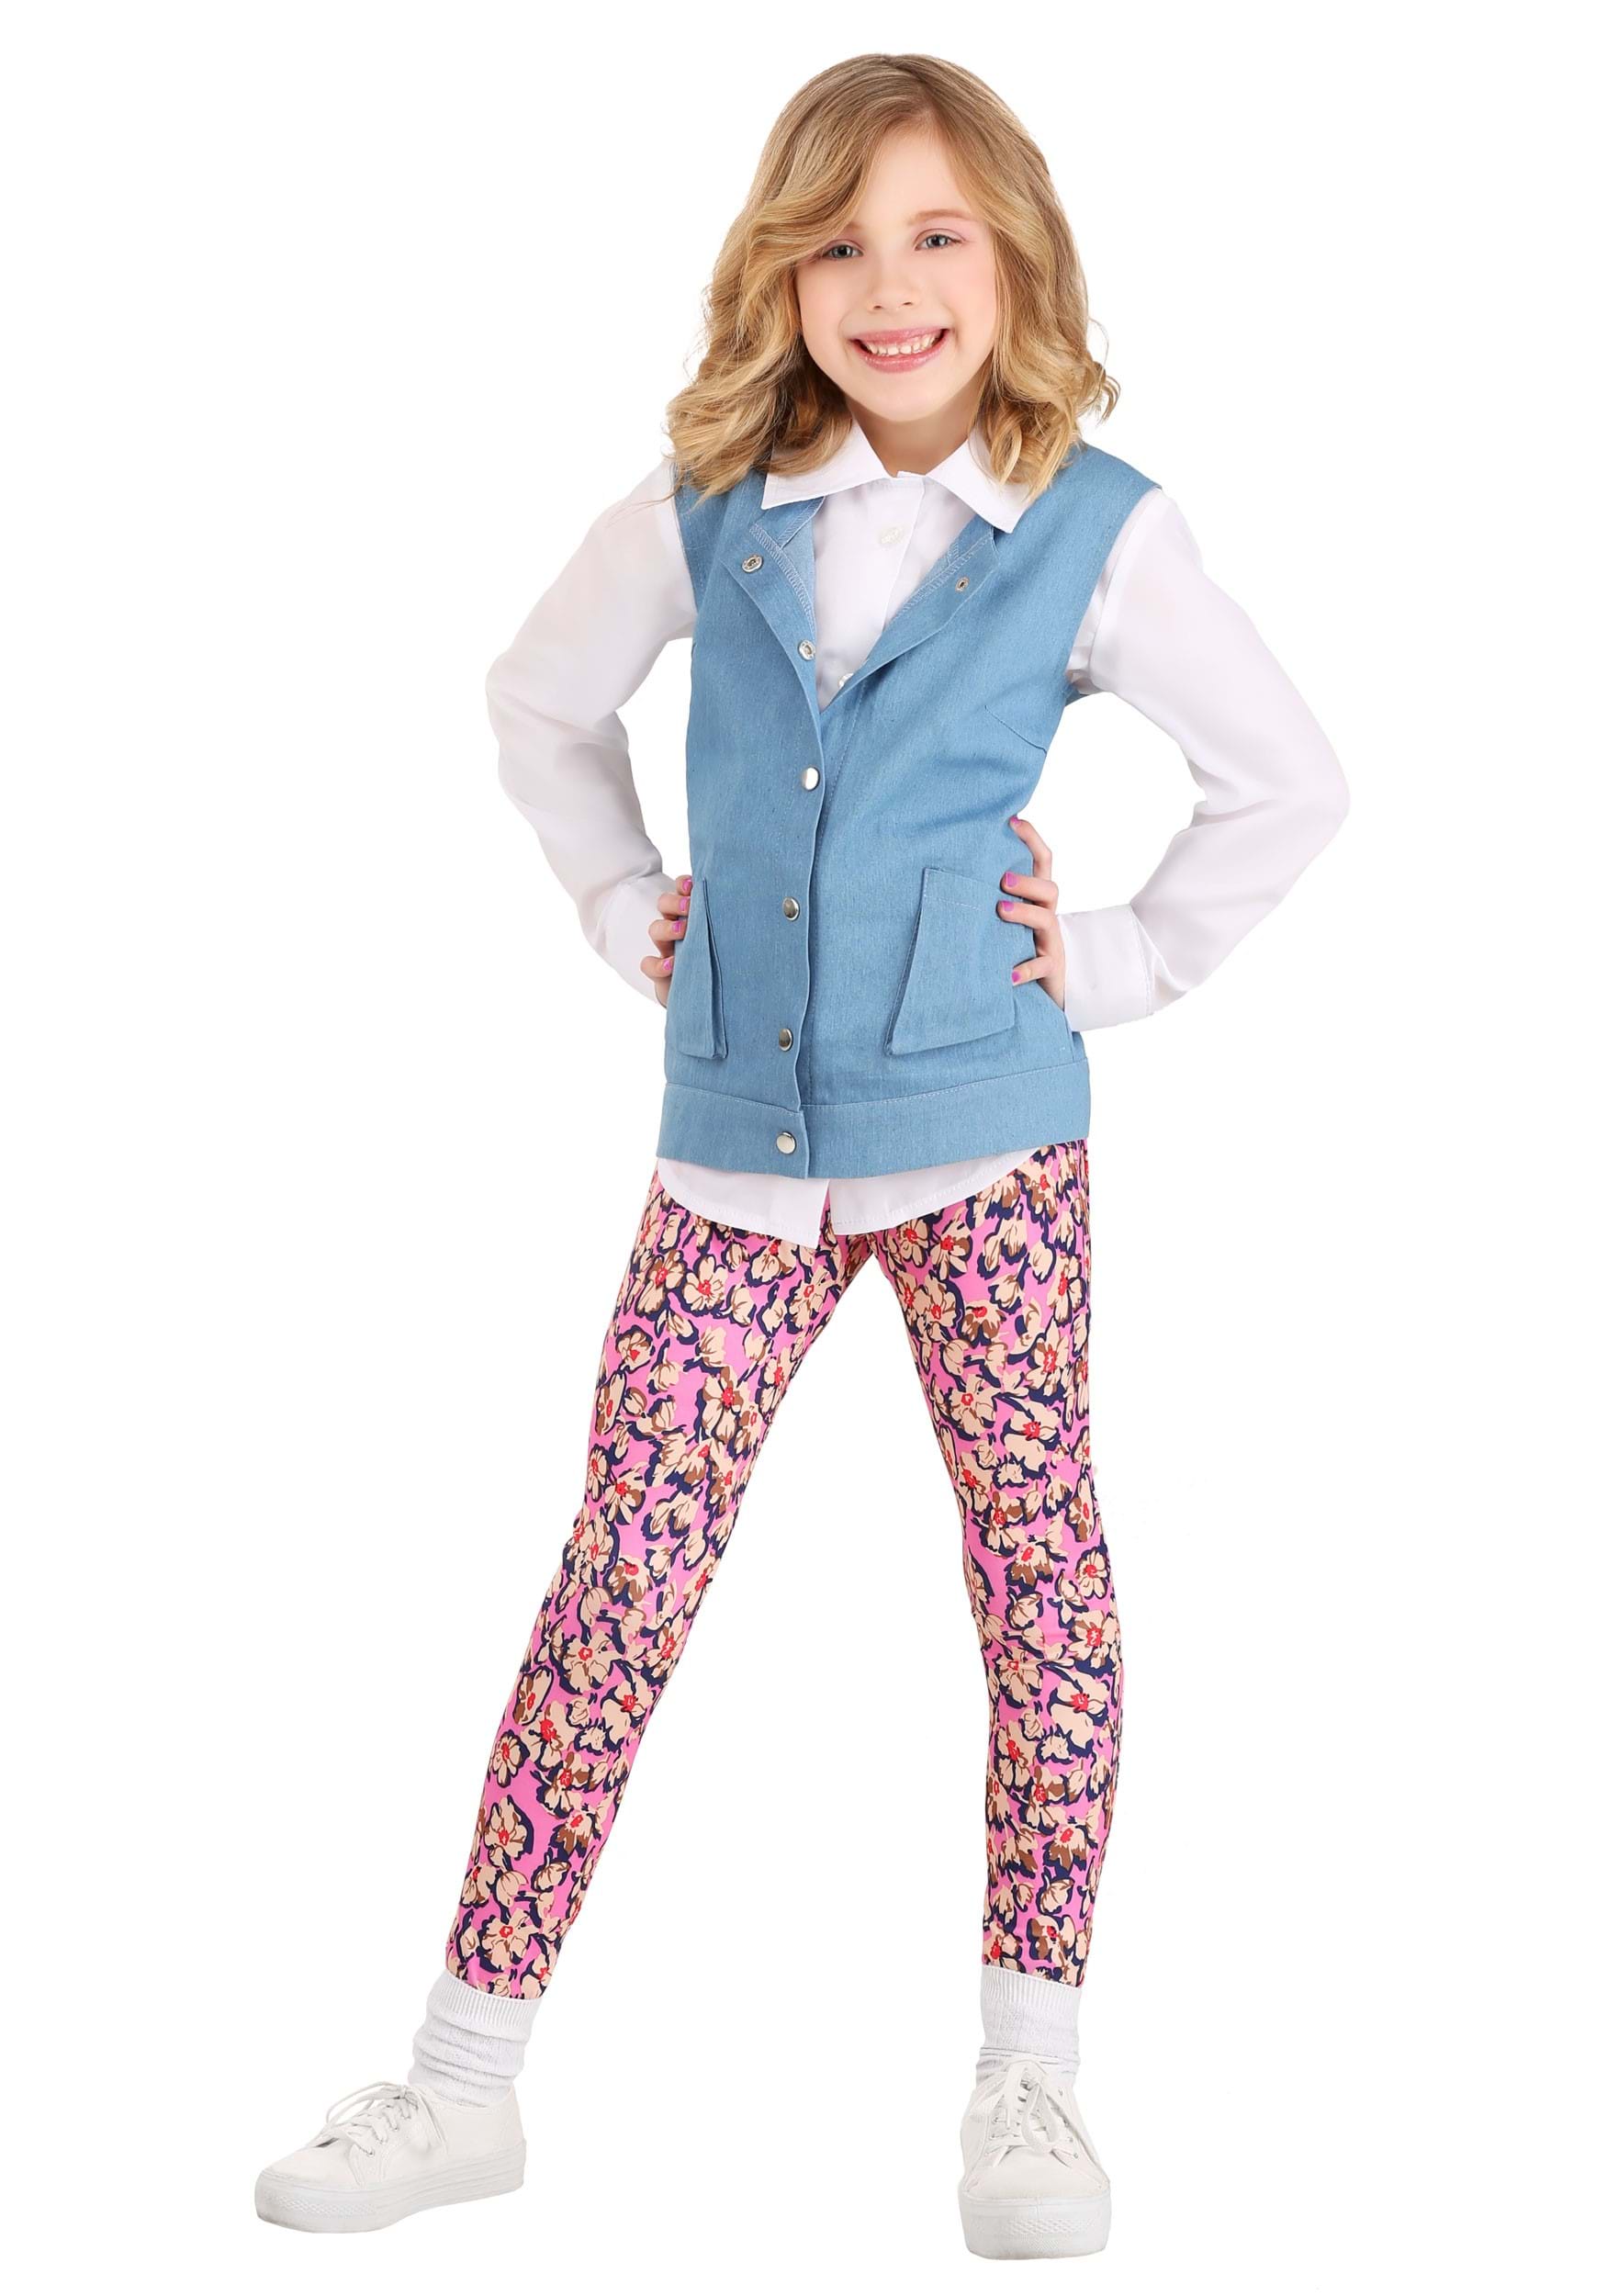 Girls Jennifer Parker Costume | Exclusive Back to the Future Costumes